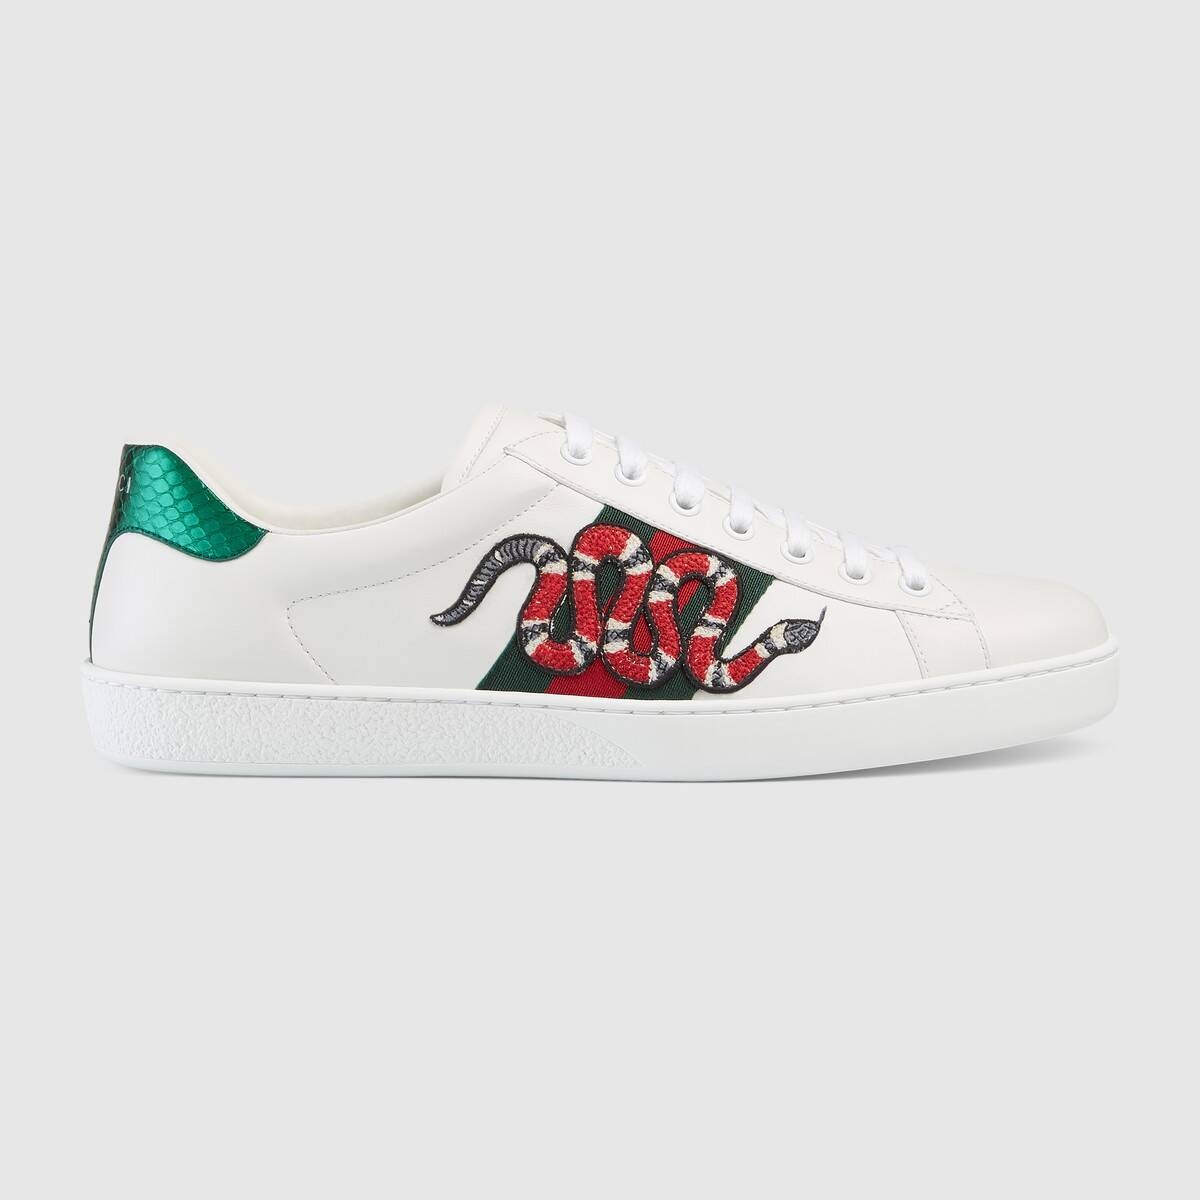 Men's Ace embroidered sneaker - 1